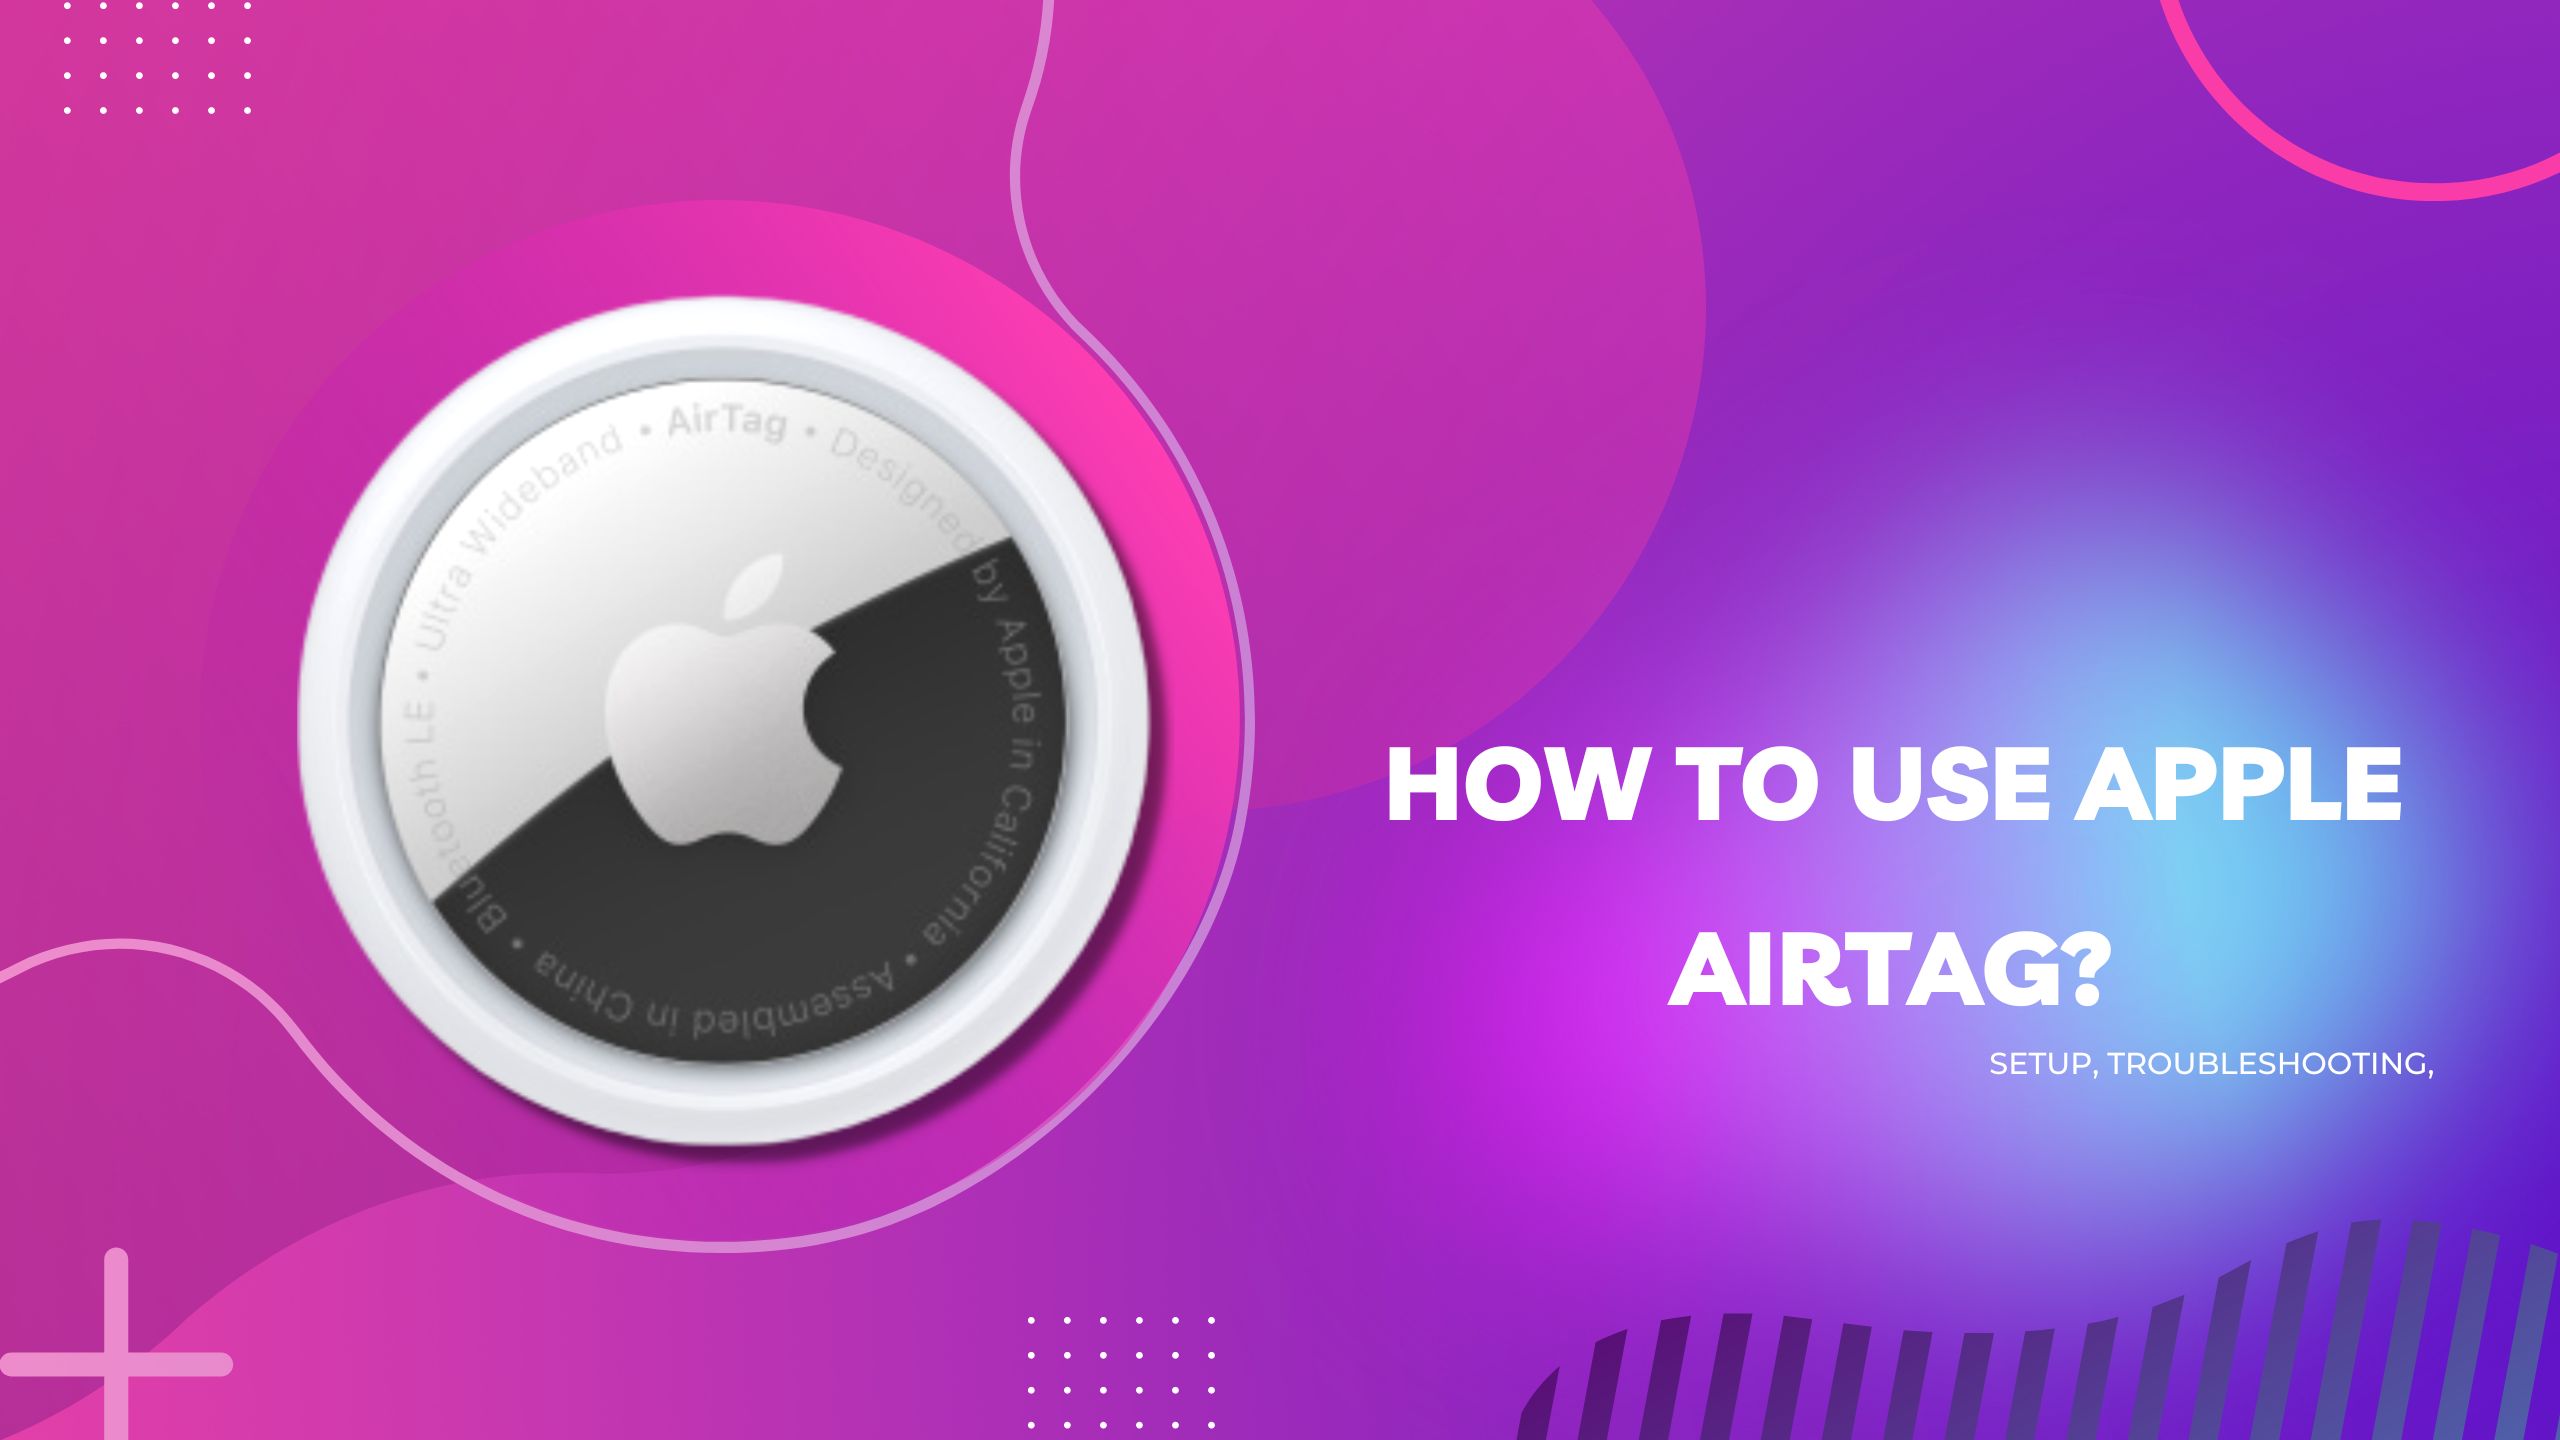 How to use Apple AirTag?